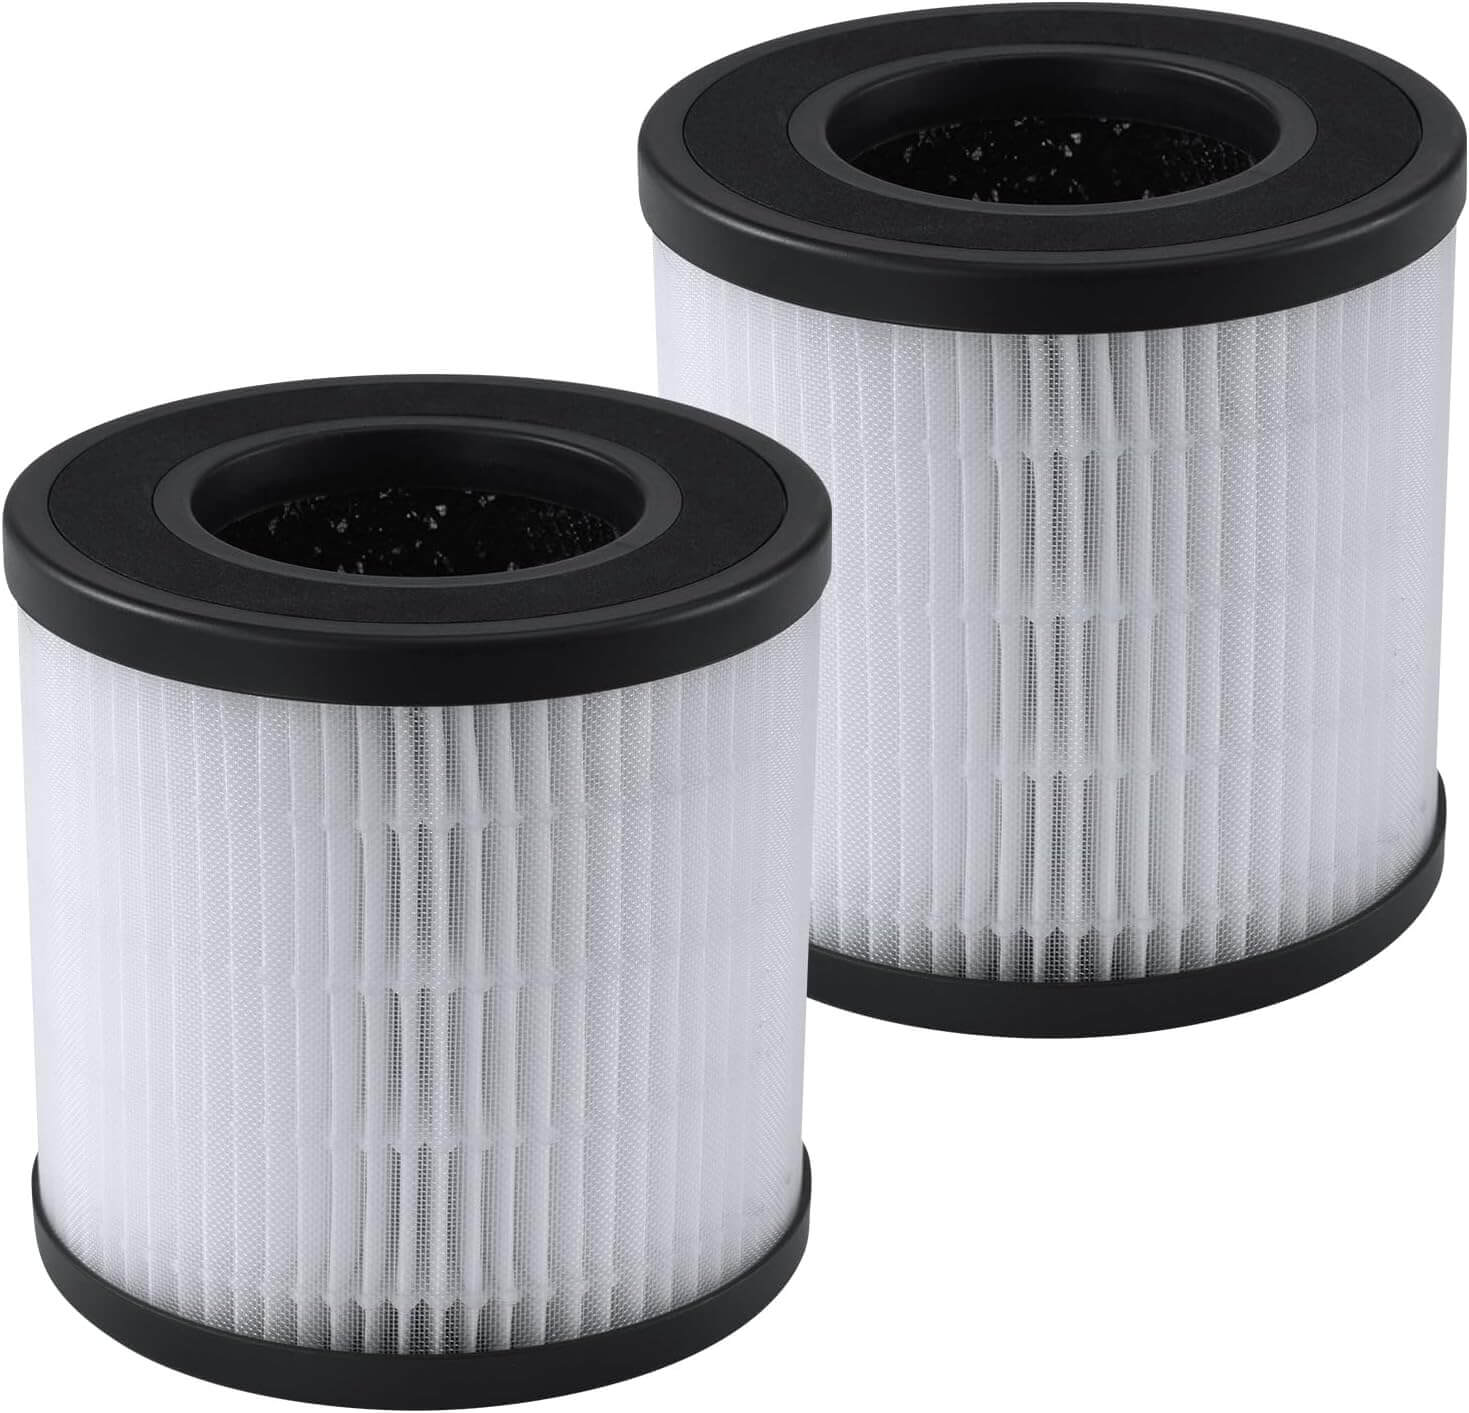 FULMINARE PU-P05 Air Purifier Replacement Filter (2 Pack)